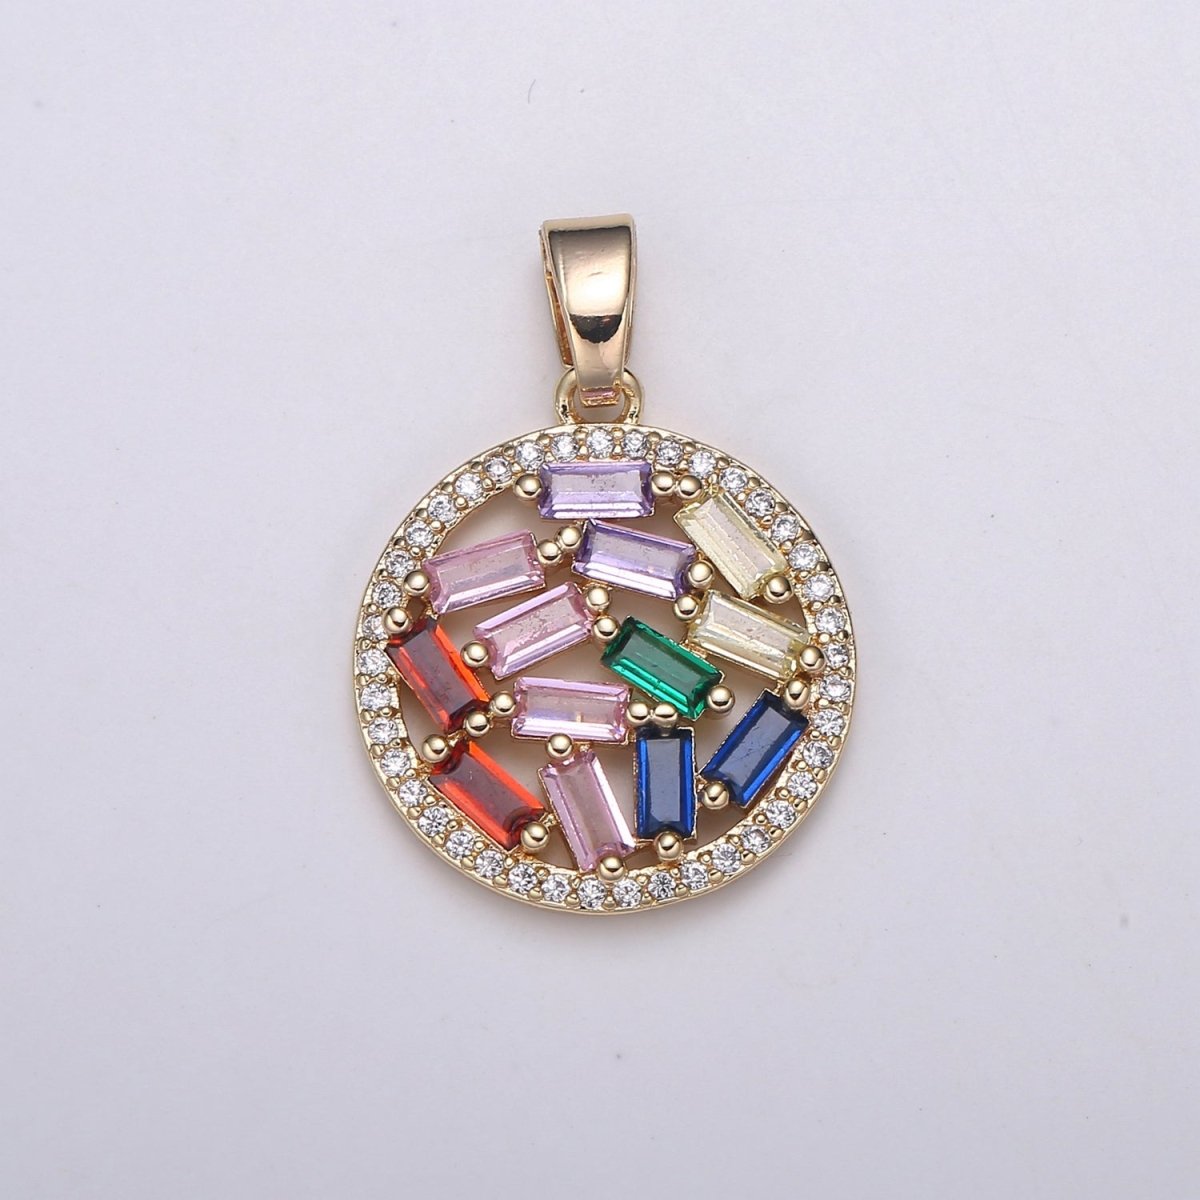 26X18mm 18K Rose Gold Round Charms, Multi Color Baguette CZ Pendant, Pave Cz Circle Charm for Minimalist Jewelry supply, J-285 - DLUXCA